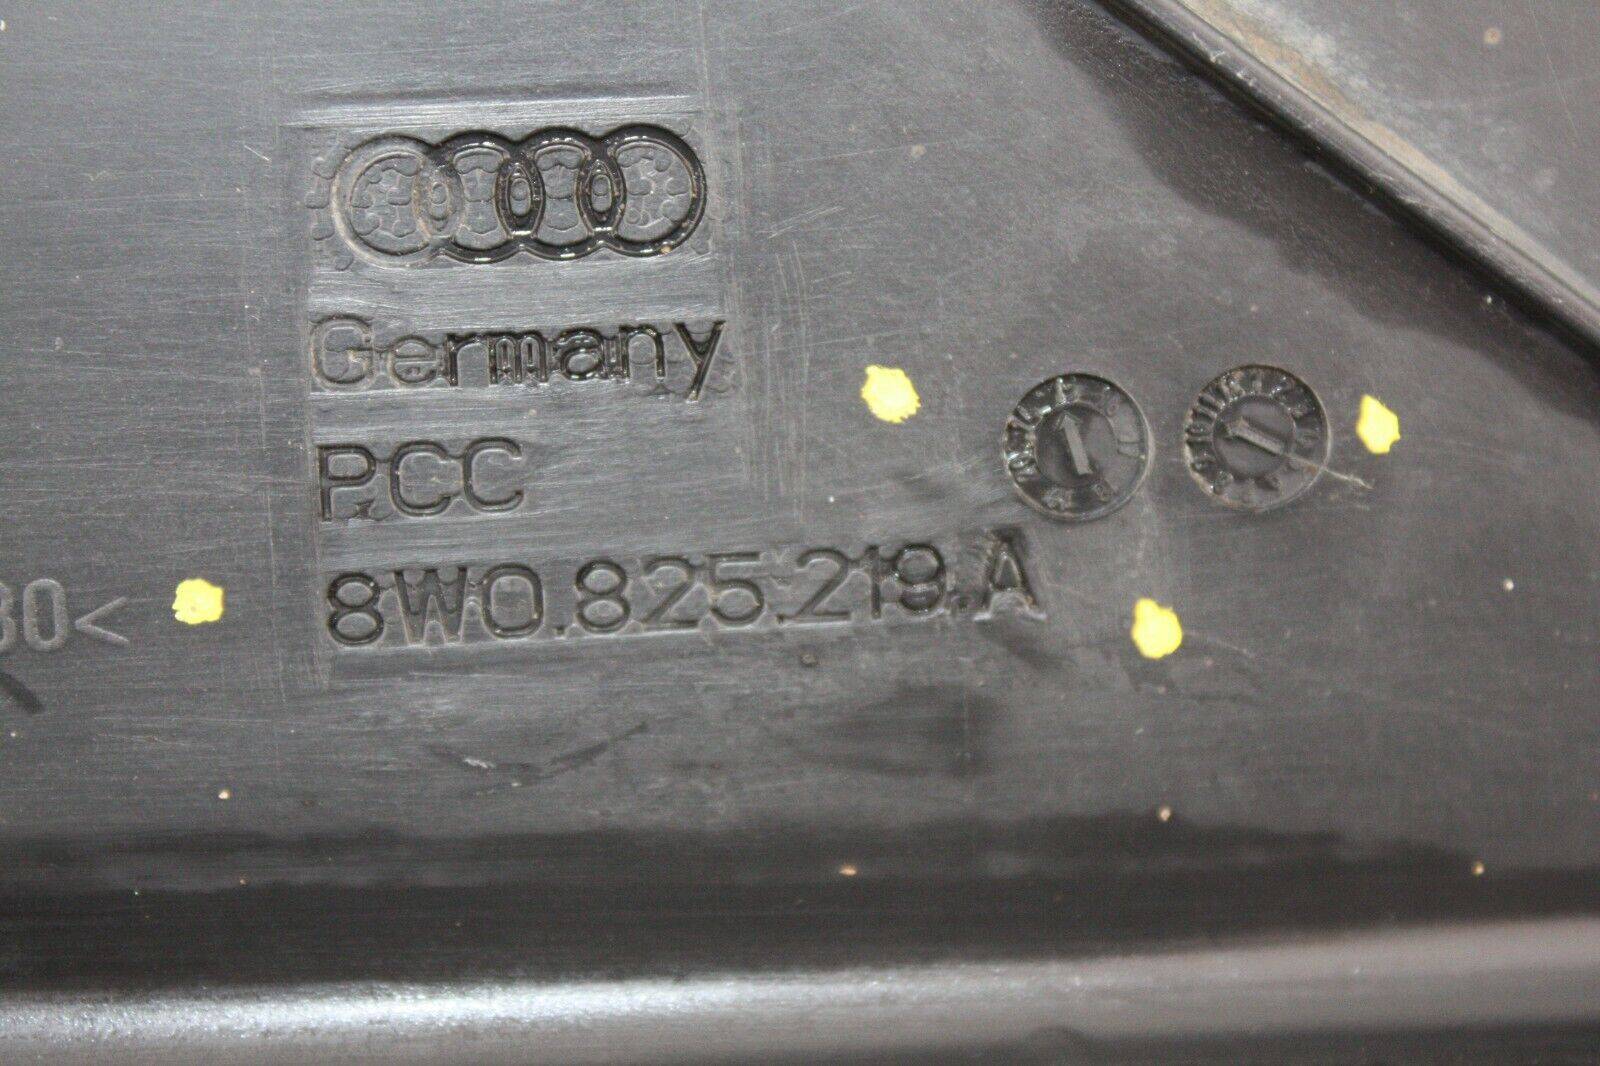 Audi-A4-Rear-Right-Underbody-Tray-Cover-2015-TO-2018-8W0825219A-175367535392-12